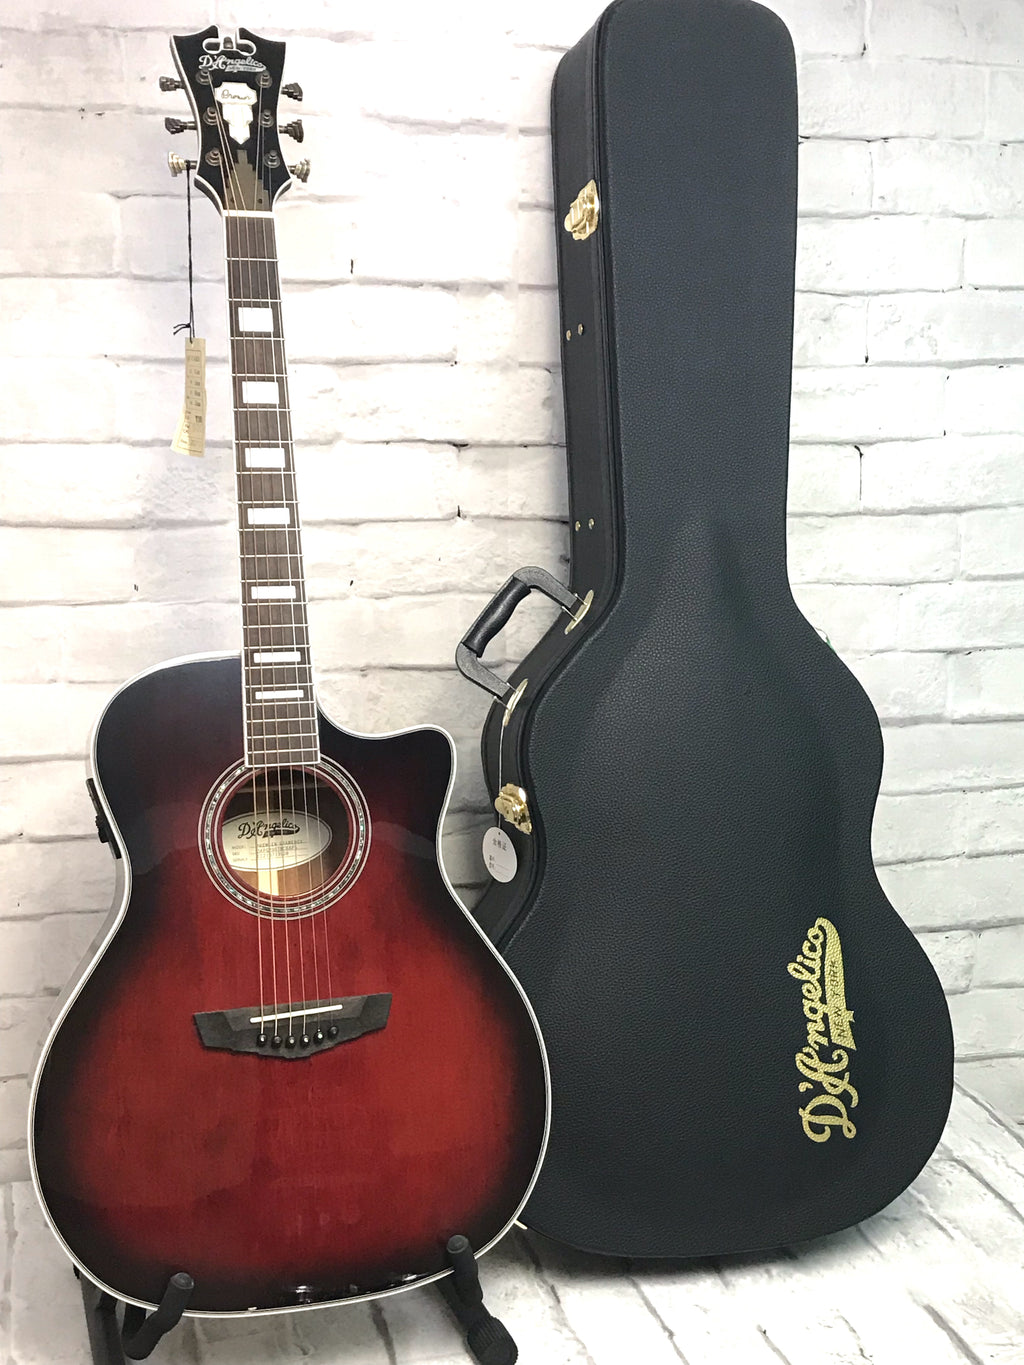 D'Angelico Premier Gramercy Acoustic-Electric Guitar With Hardshell Case, Trans Black Cherry Burst